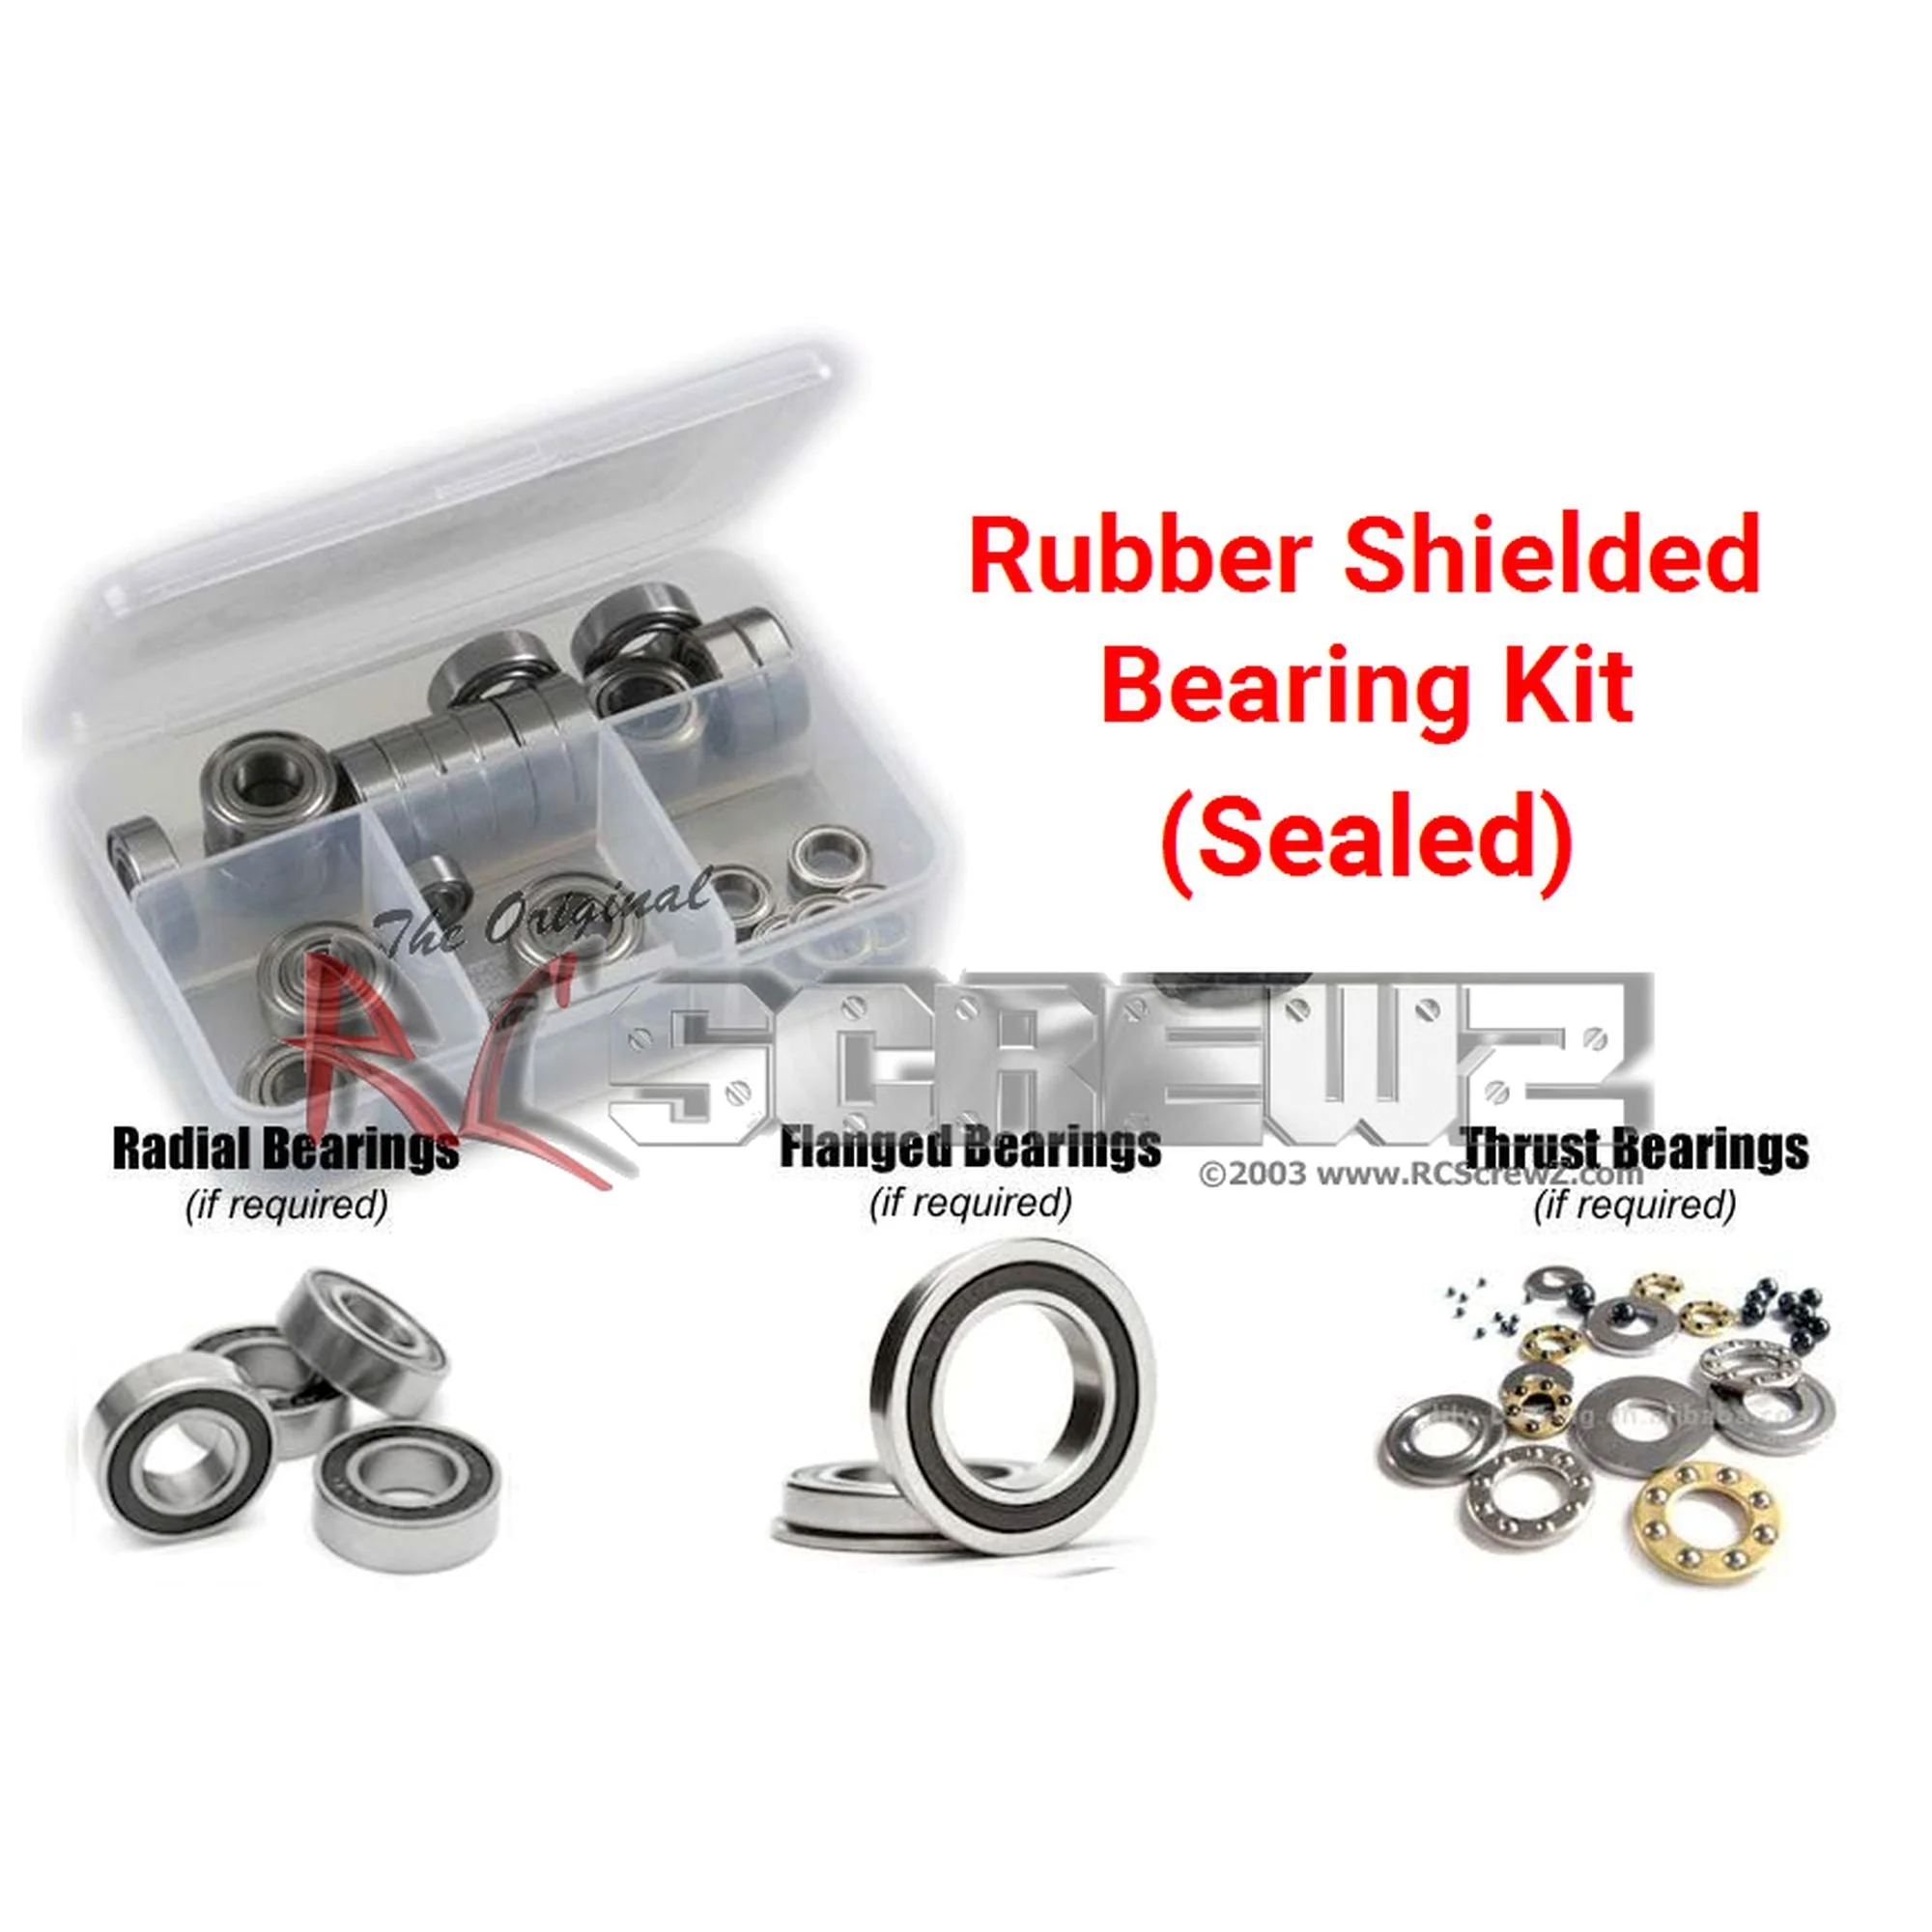 RCScrewZ Rubber Shielded Bearing Kit kyo138r for Kyosho DRX 4wd 1/9th #31042 - Picture 1 of 12